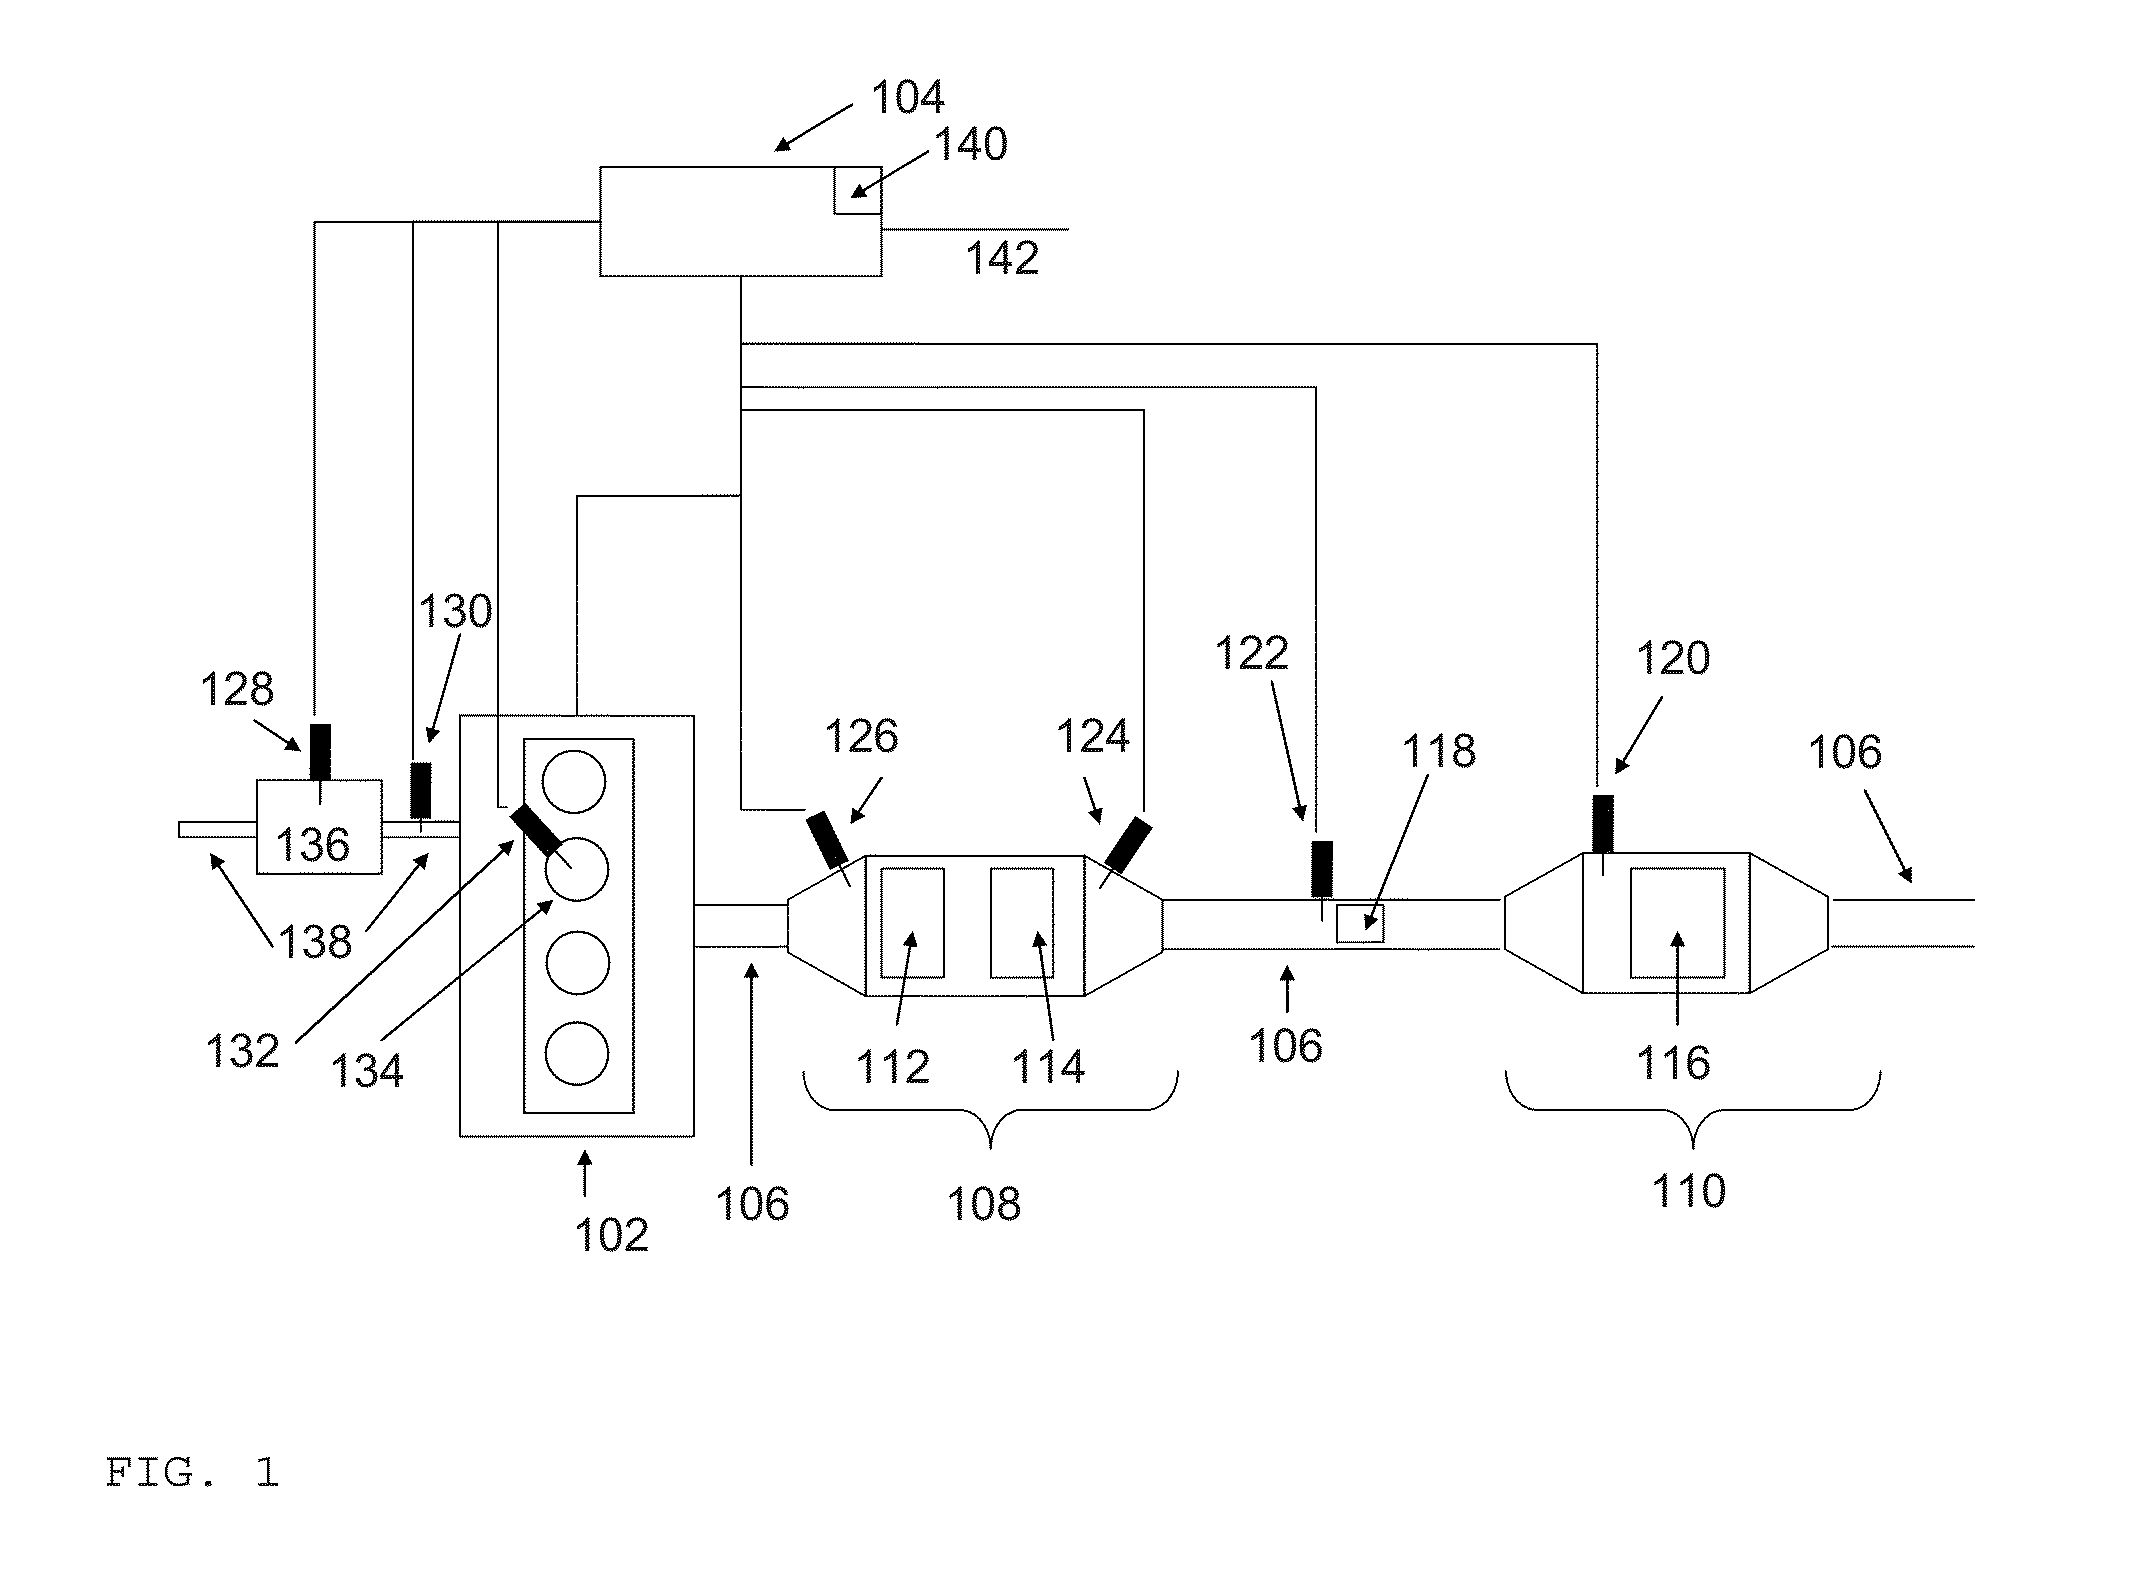 Radio Frequency Process Sensing, Control, And Diagnostics Network